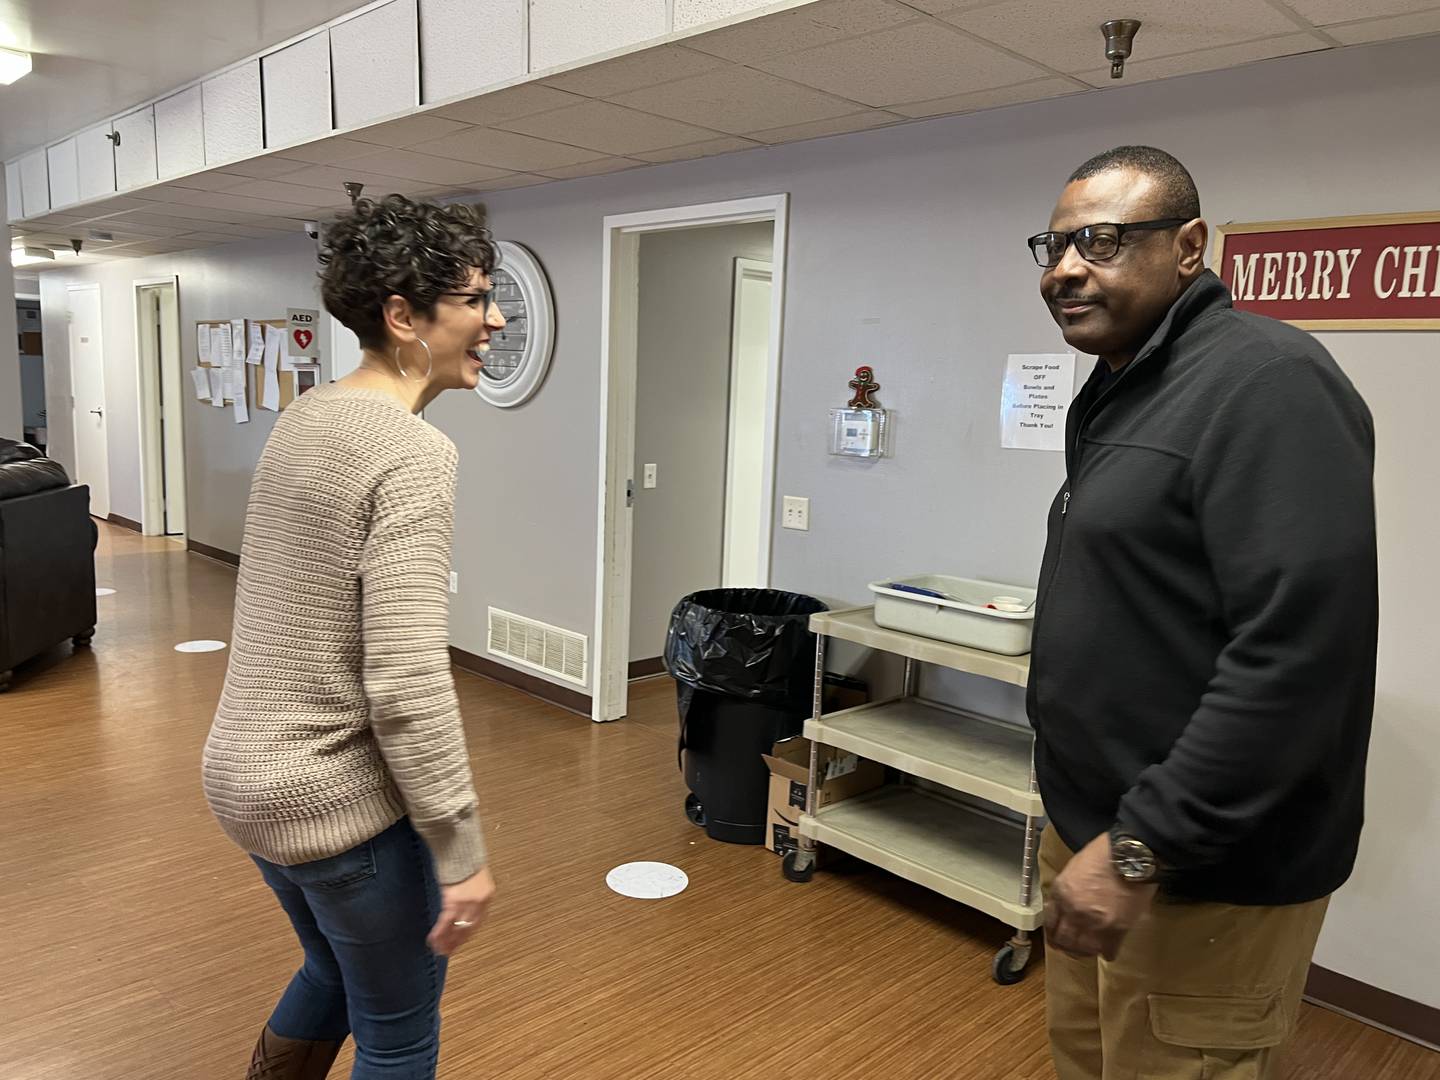 Angie Shoulis, Hope Haven's emergency shelter coordinator, and Gary Chapman, Hope Haven's Associate Director talk in the emergency shelter's women's common room on Jan. 6, 2023.